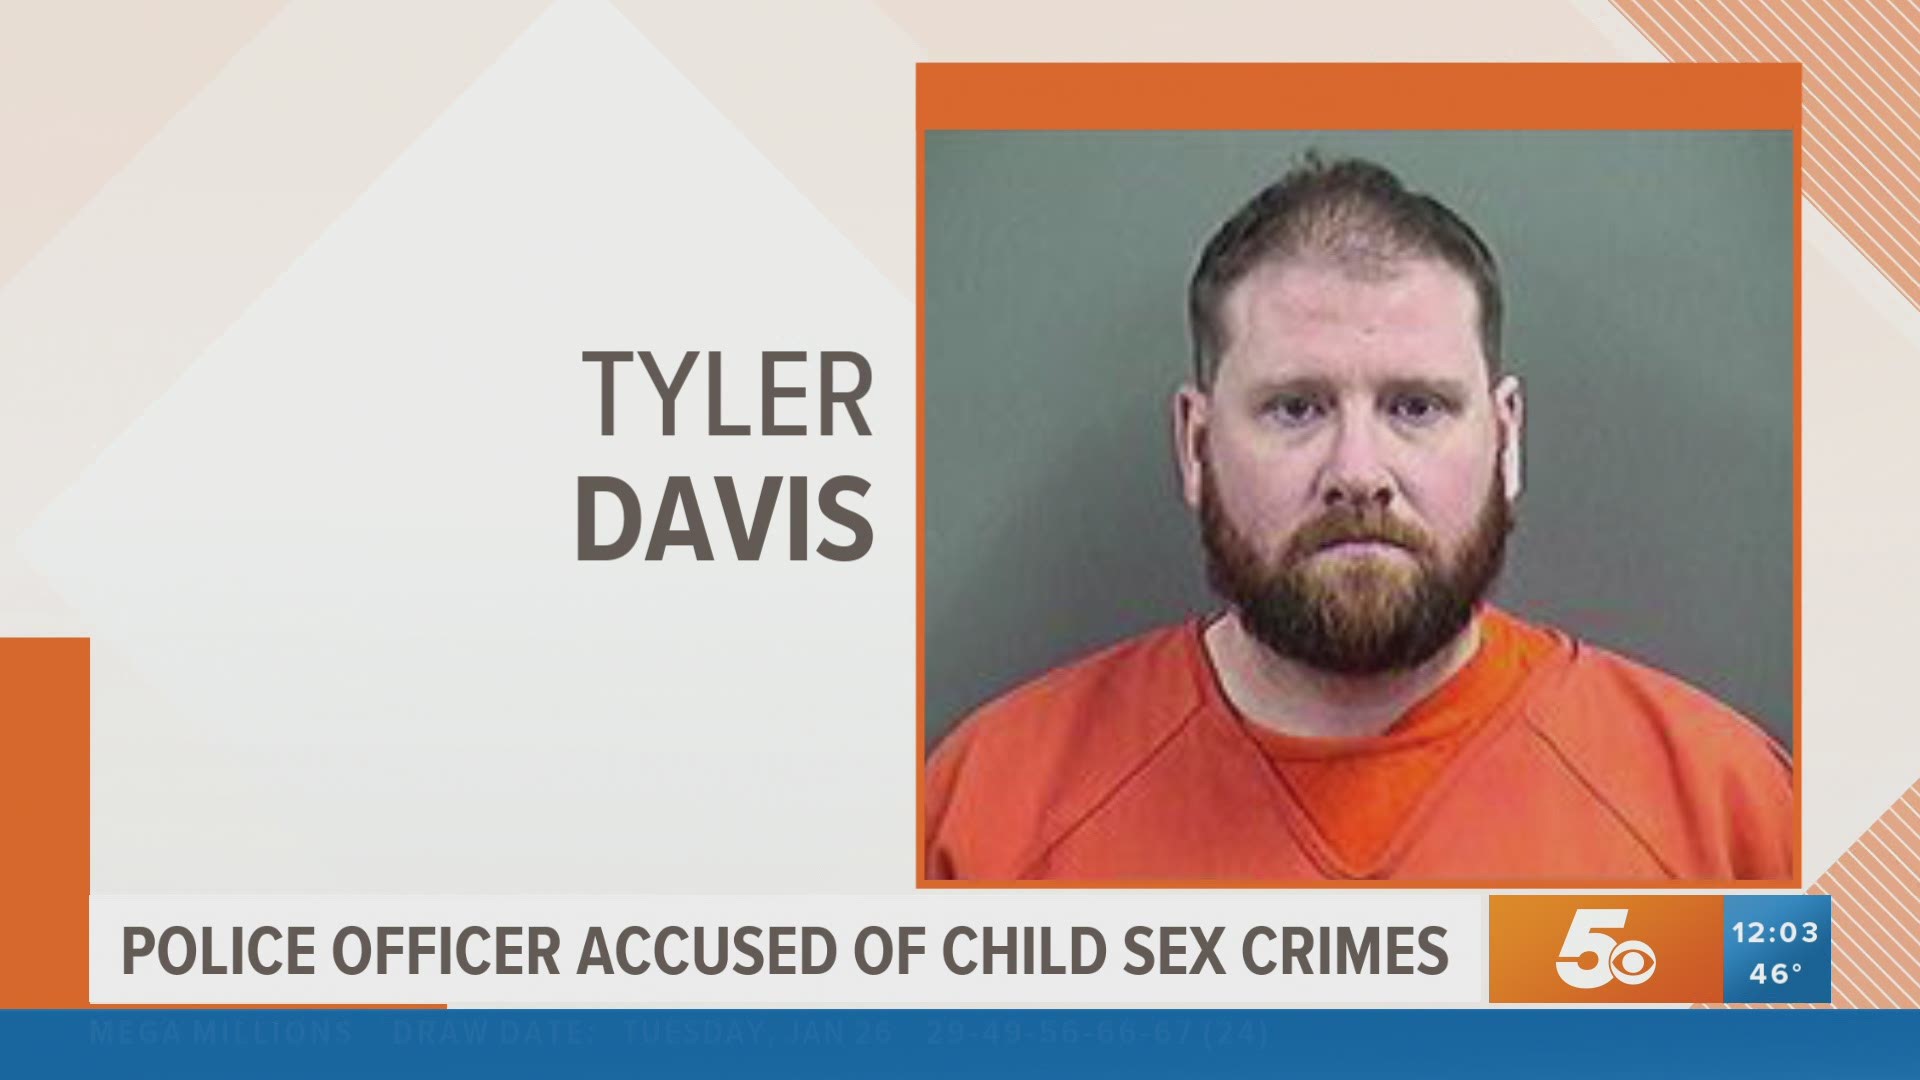 A police officer has been accused of child sex crimes.